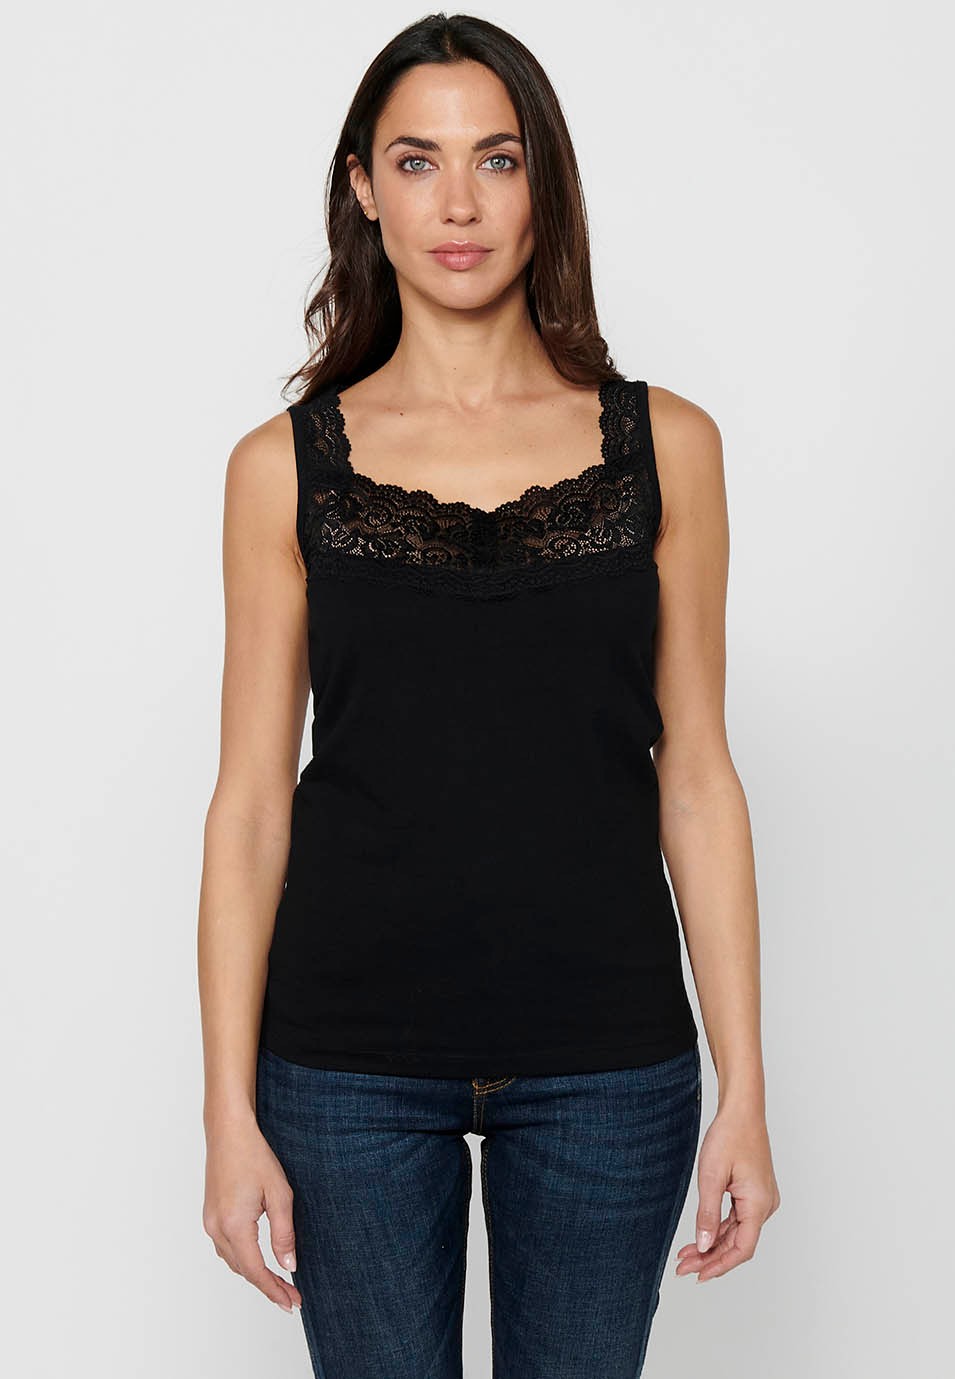 Cotton Tank Top with Black Lace Front Detail for Women 2